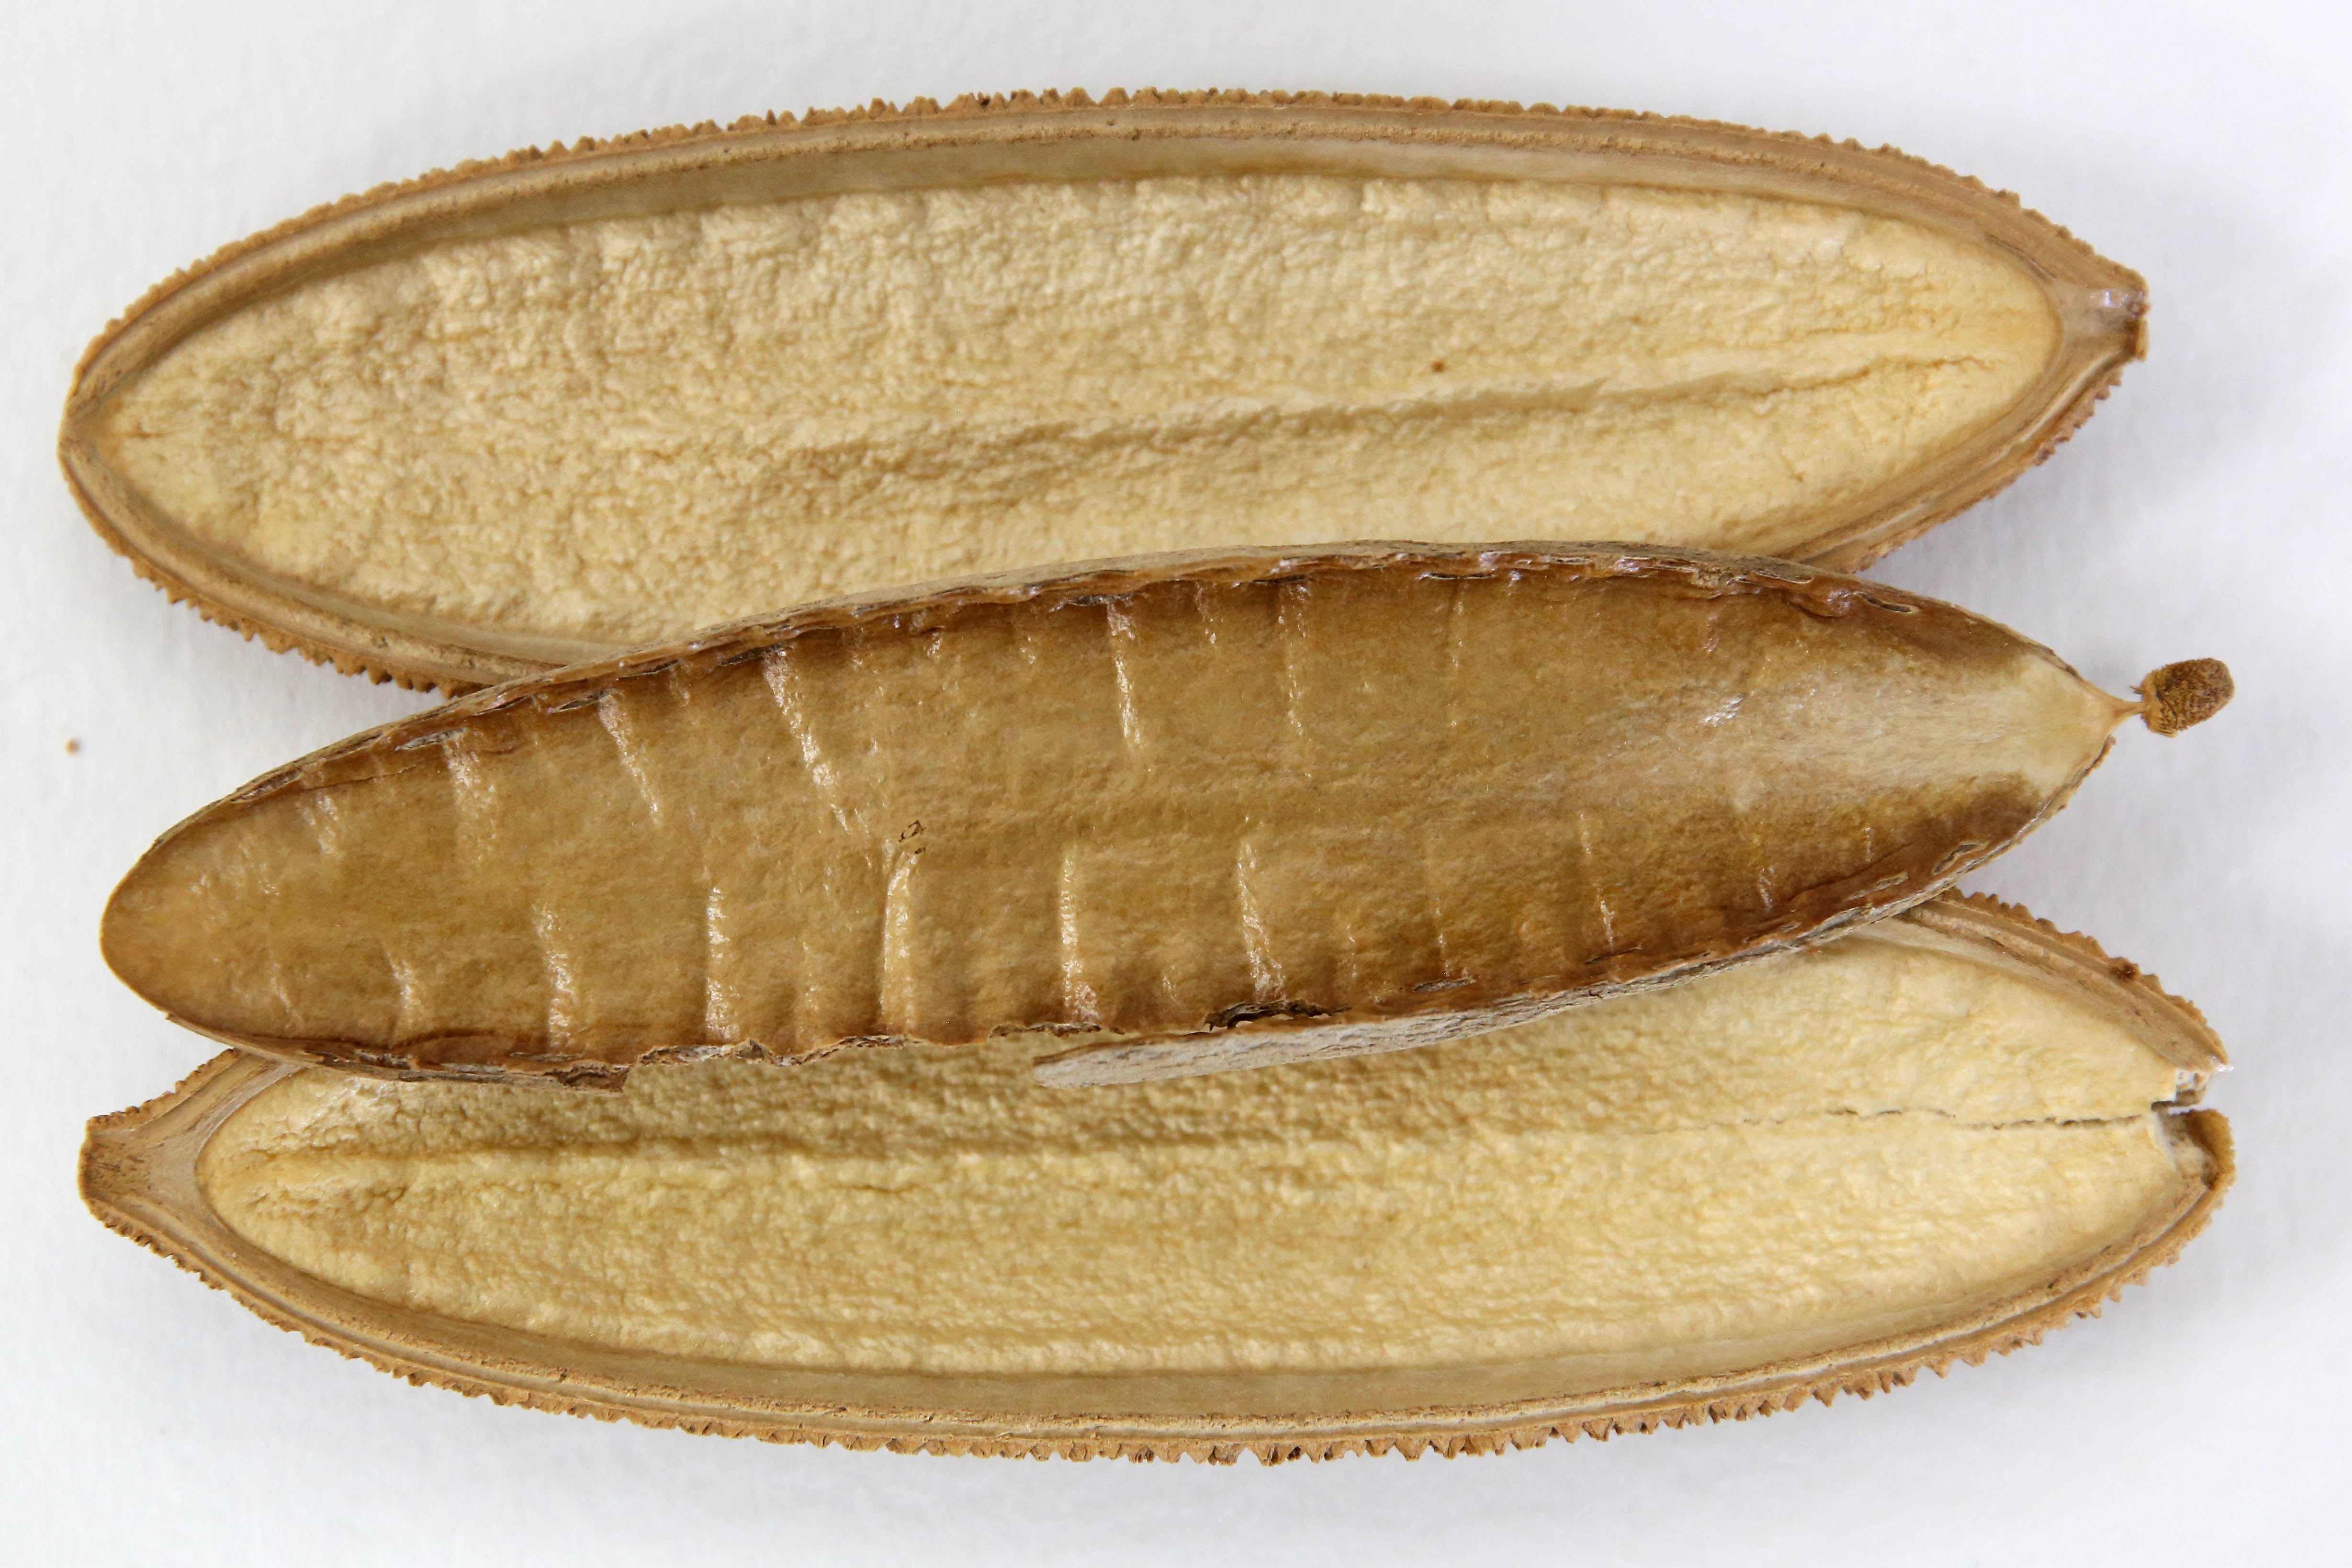 An example of a legume pod